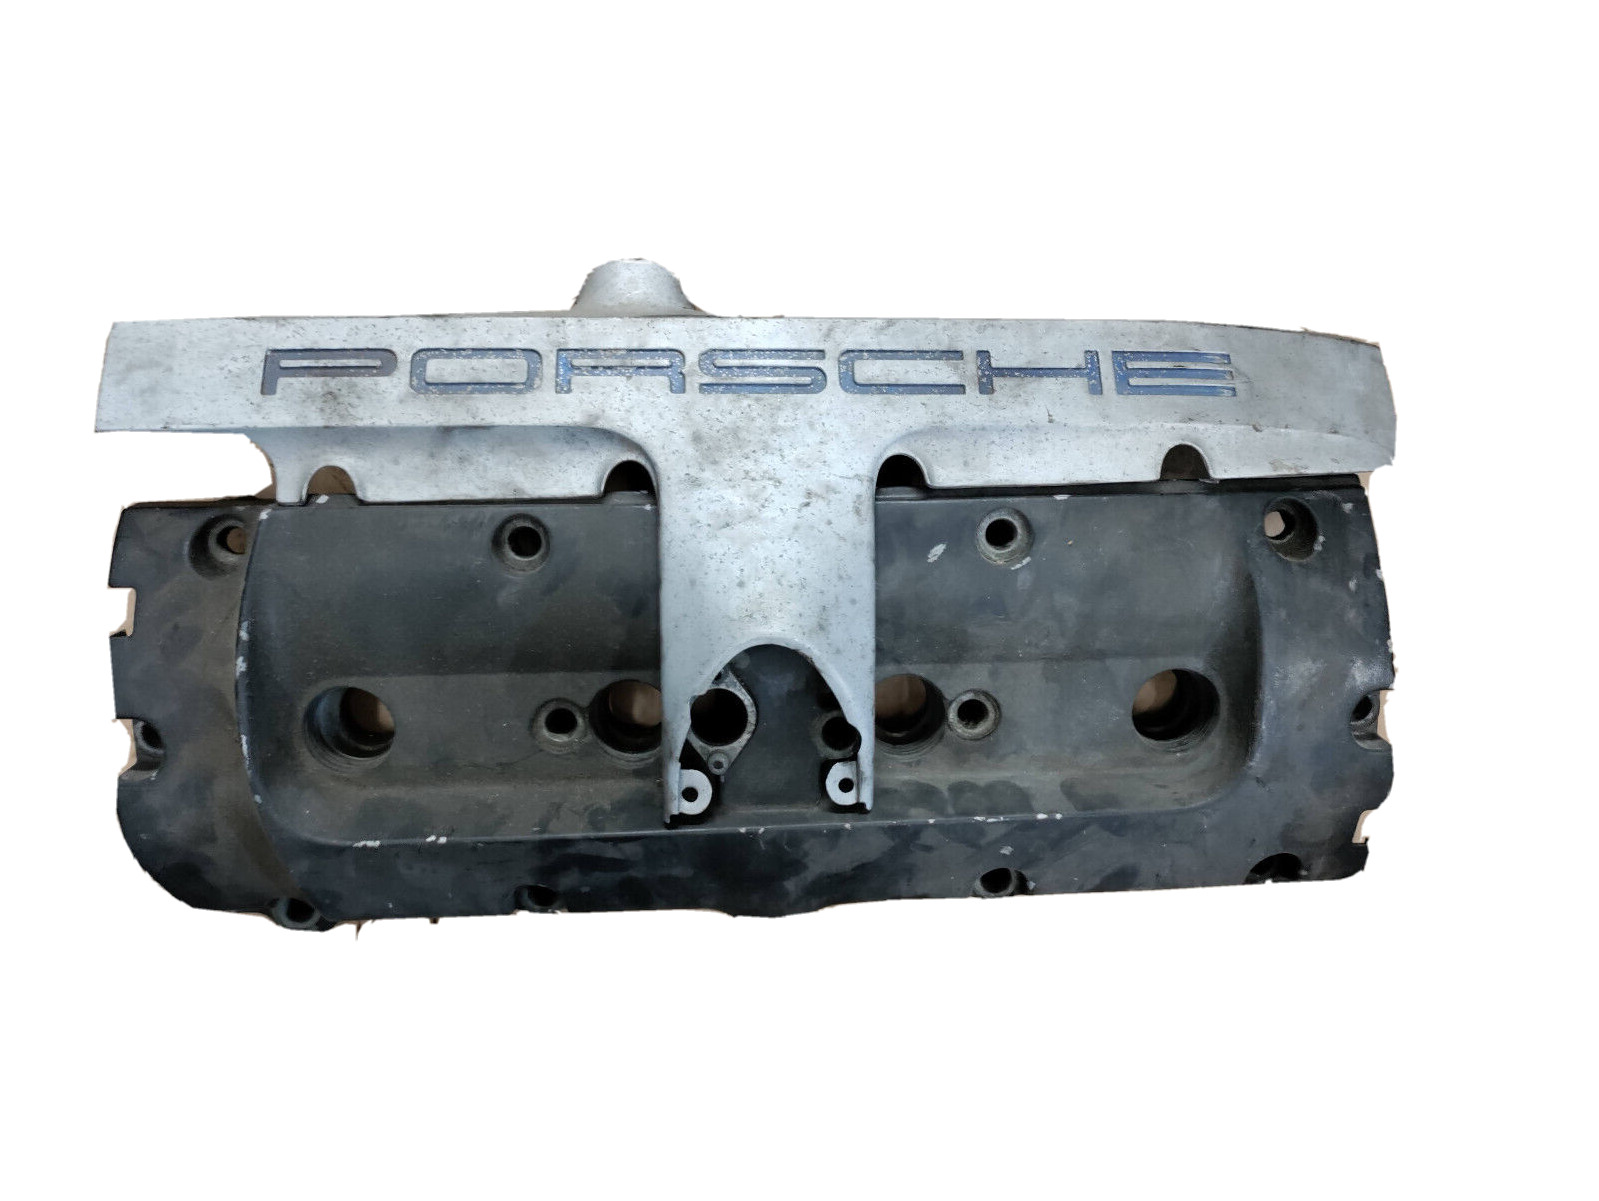 Porsche 968 Valve Covers Part Number: 944.104.461.02  and  944.110.380.0